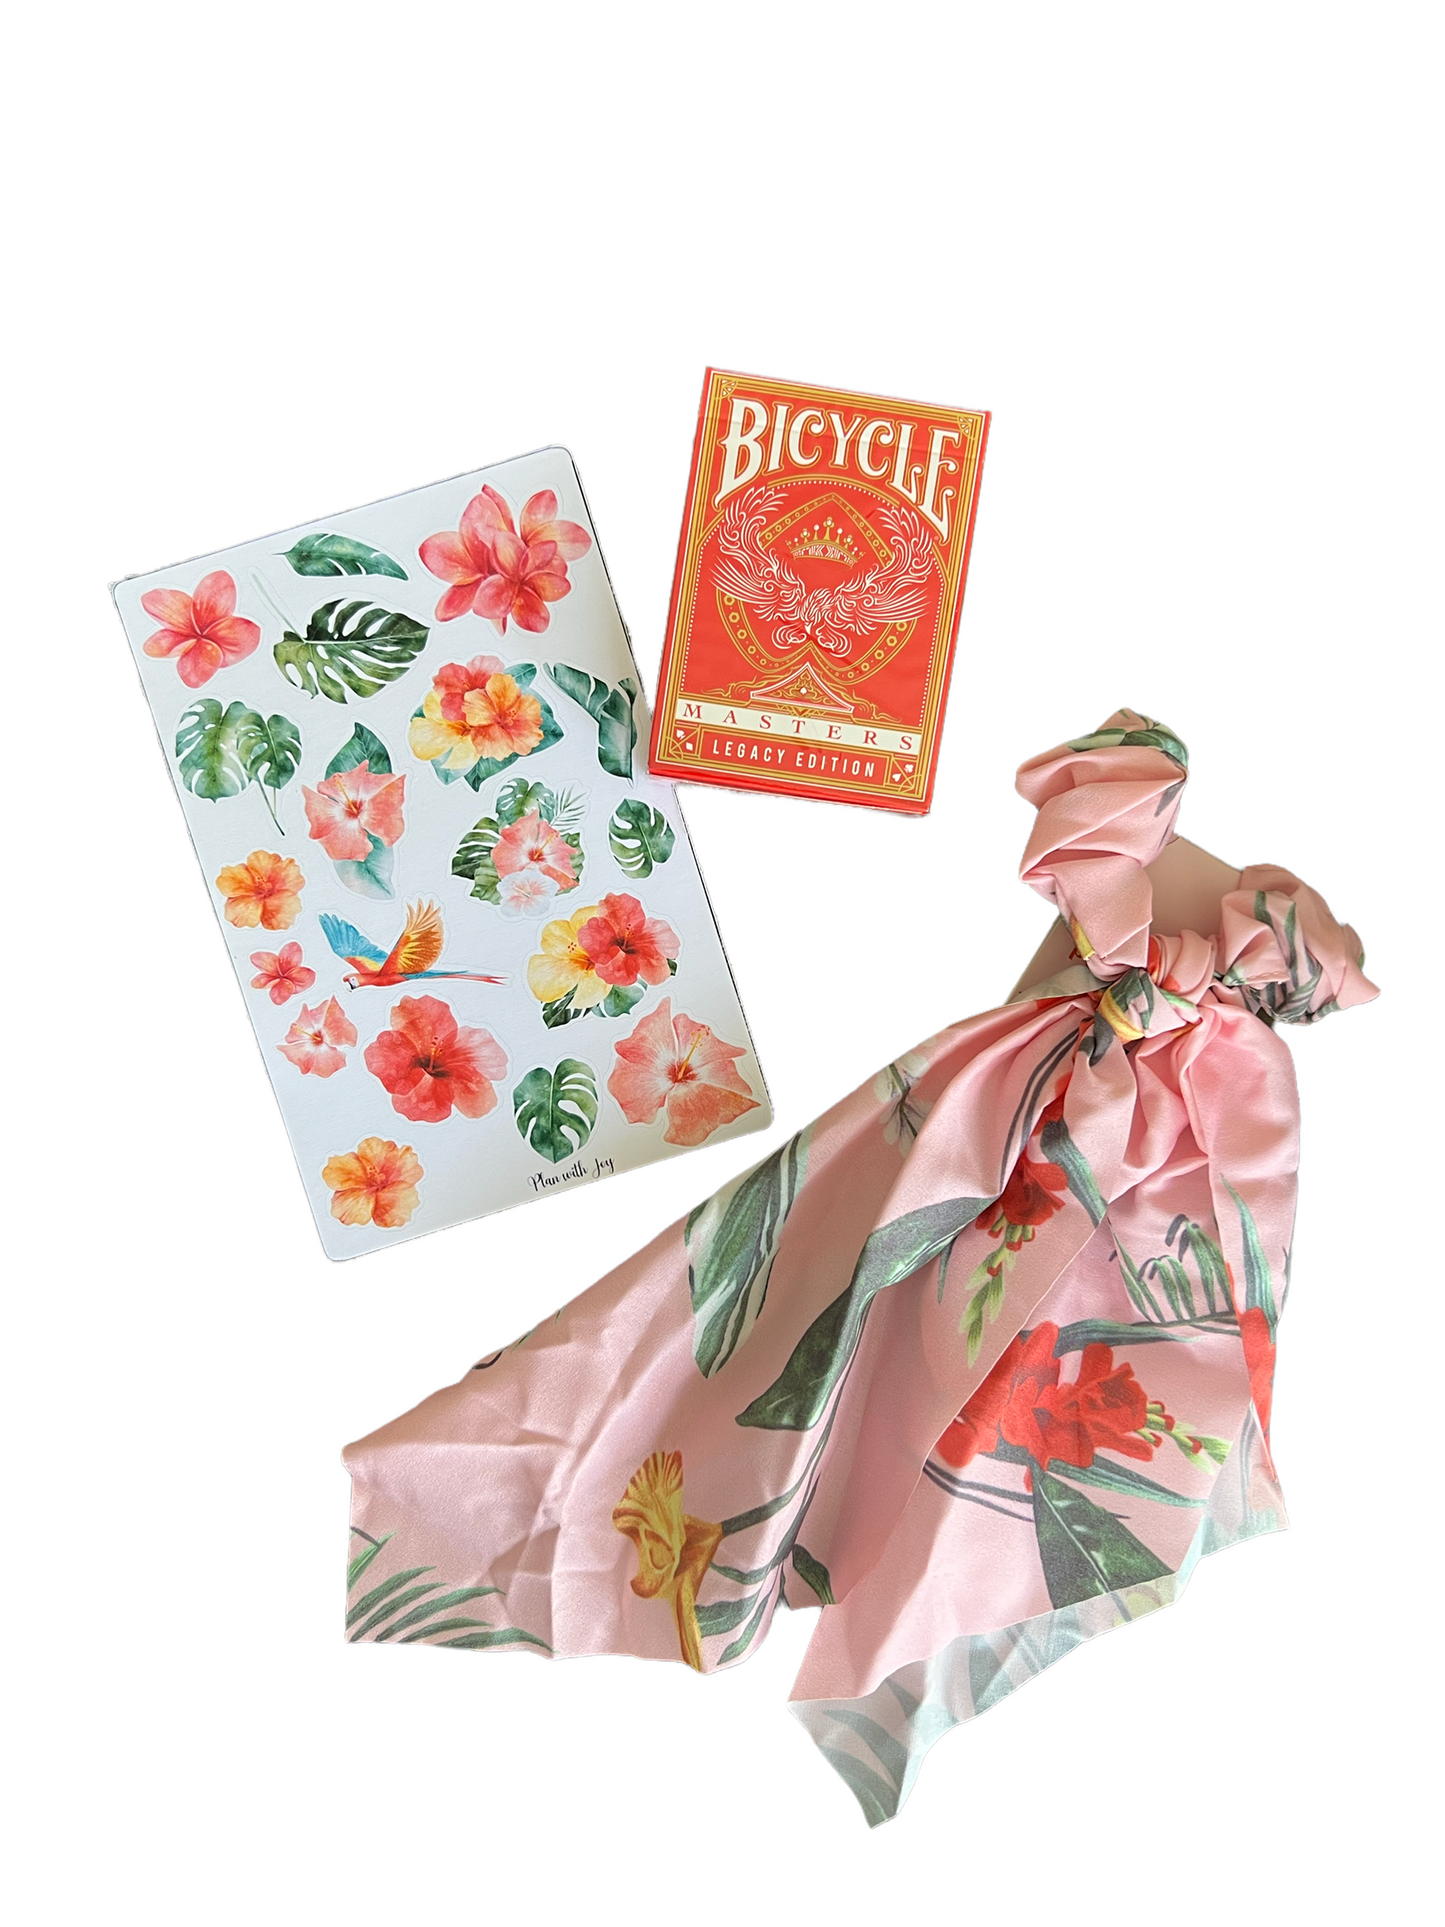 Tropical bujo stickers, hair scrunchie and red Bicycle playing cards